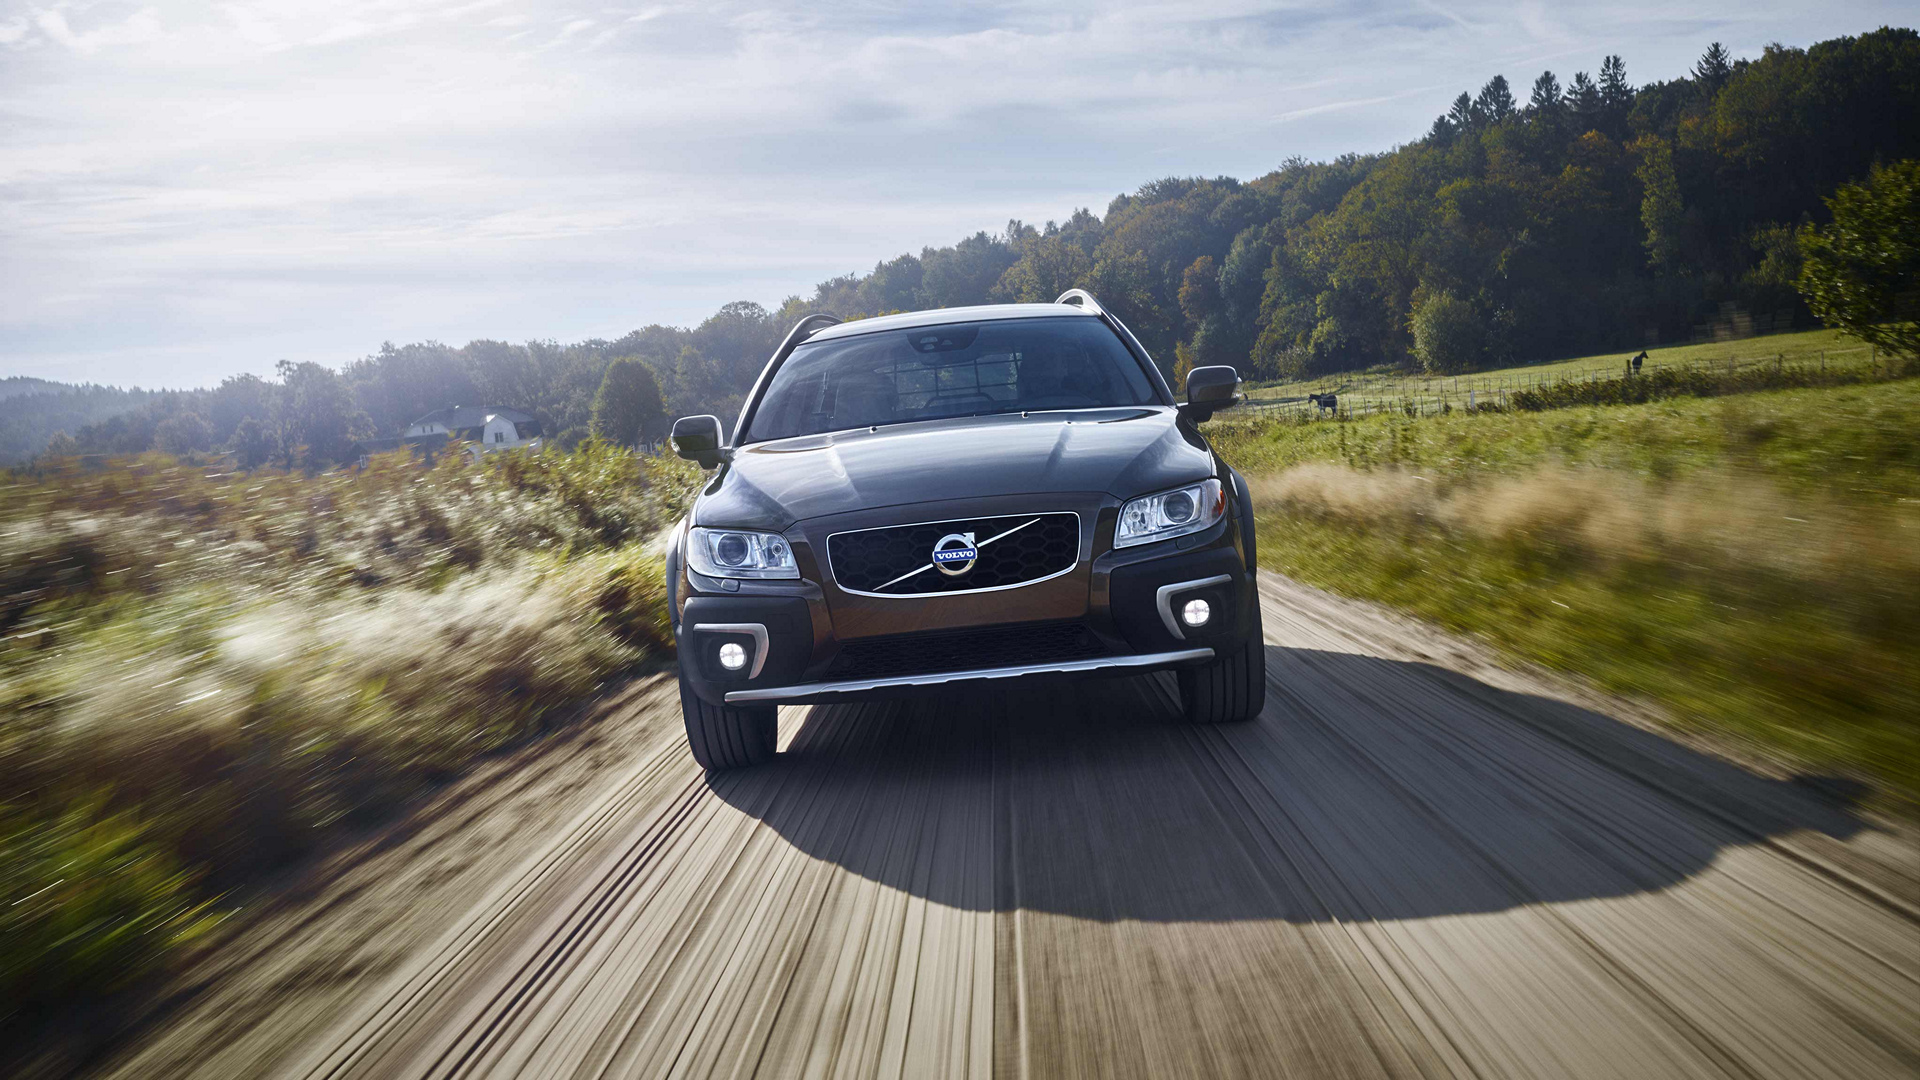 2016 Volvo XC70 © Zhejiang Geely Holding Group Co., Ltd